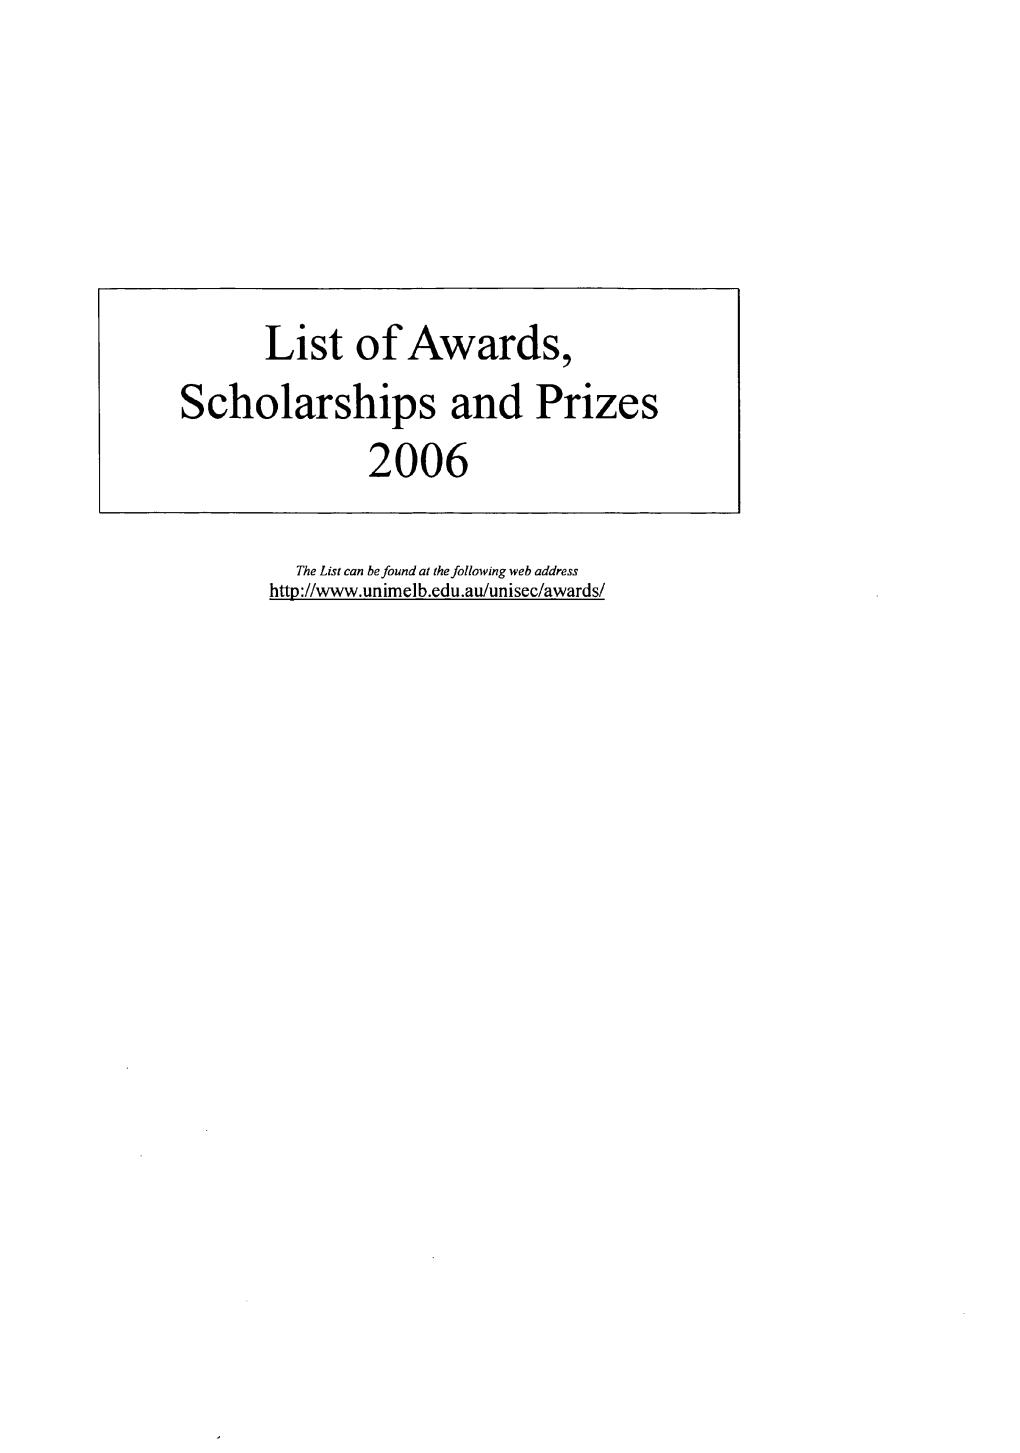 List of Awards, Scholarships and Prizes 2006